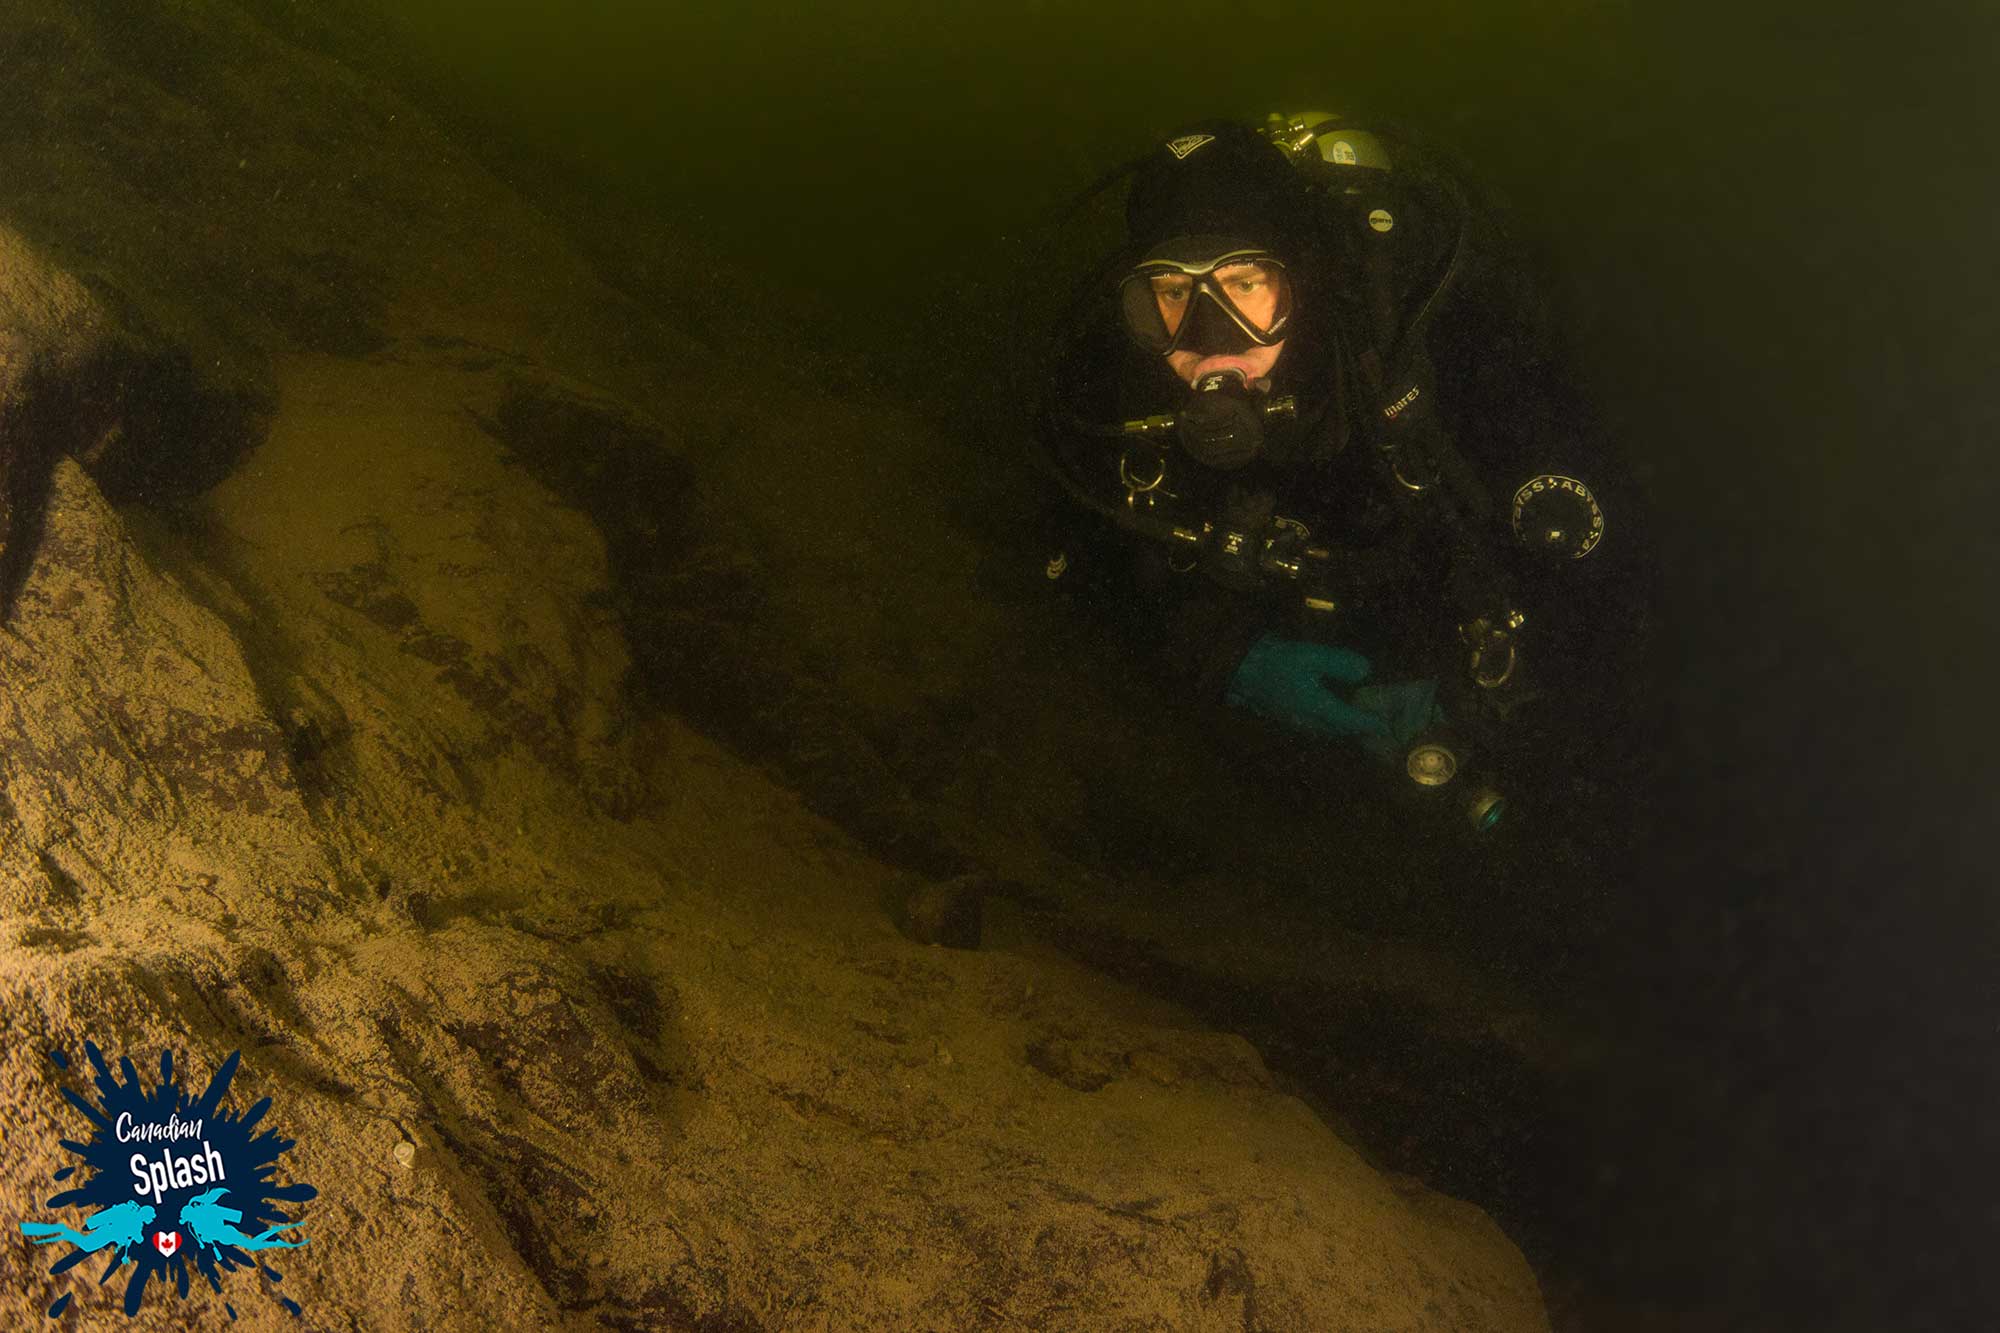 A Scuba Diver Underwater Along The Rocky Wall Of The Meteor Impact West Hawk Lake In Manitoba, Scuba Diving Canada